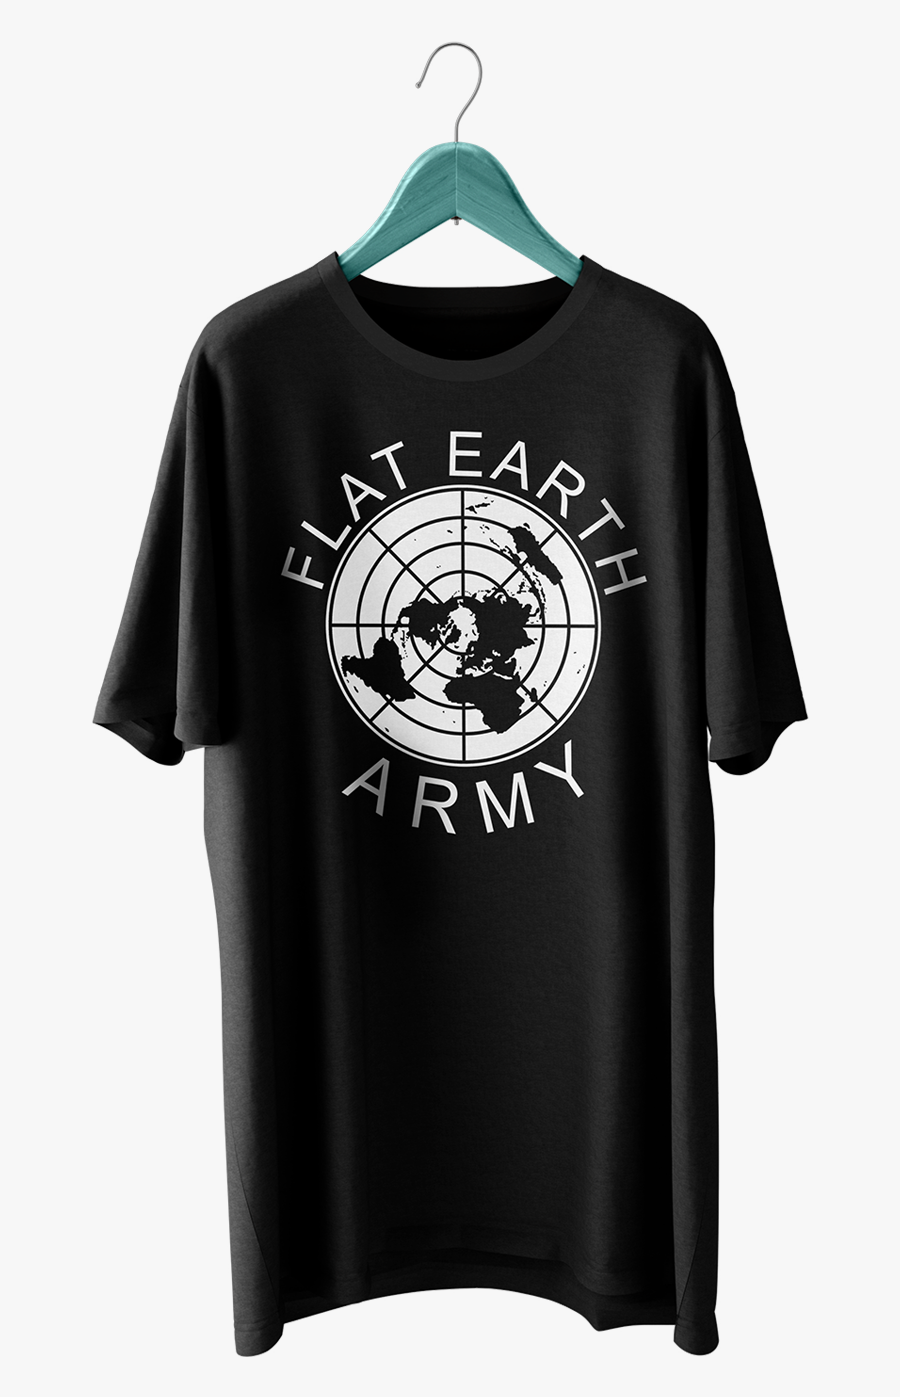 Flat Earth Army - United Nations, Transparent Clipart